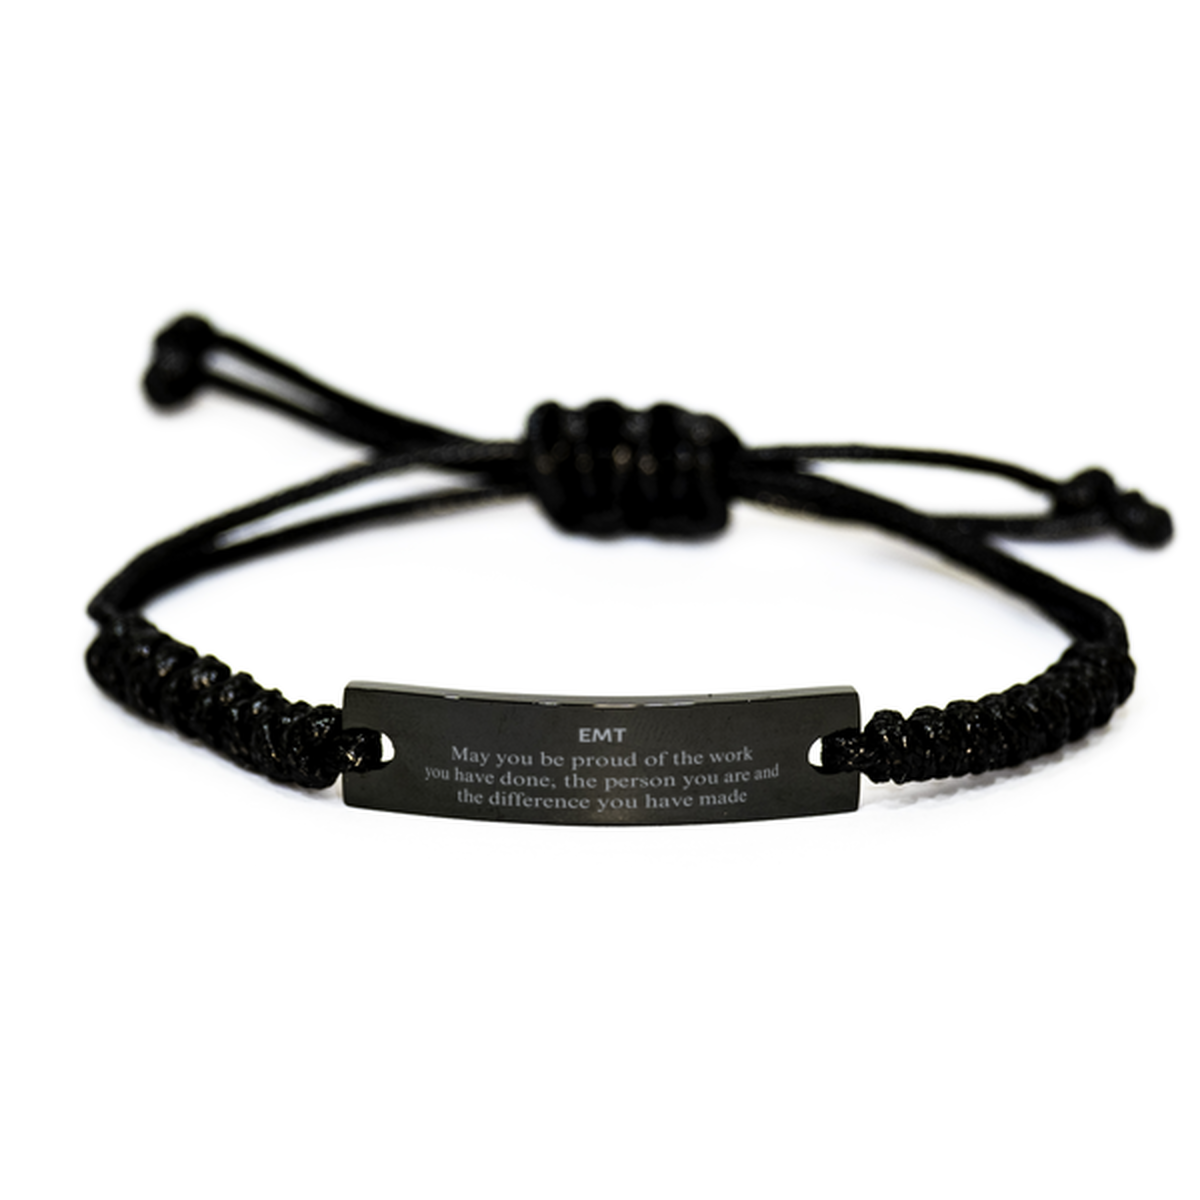 EMT May you be proud of the work you have done, Retirement EMT Black Rope Bracelet for Colleague Appreciation Gifts Amazing for EMT